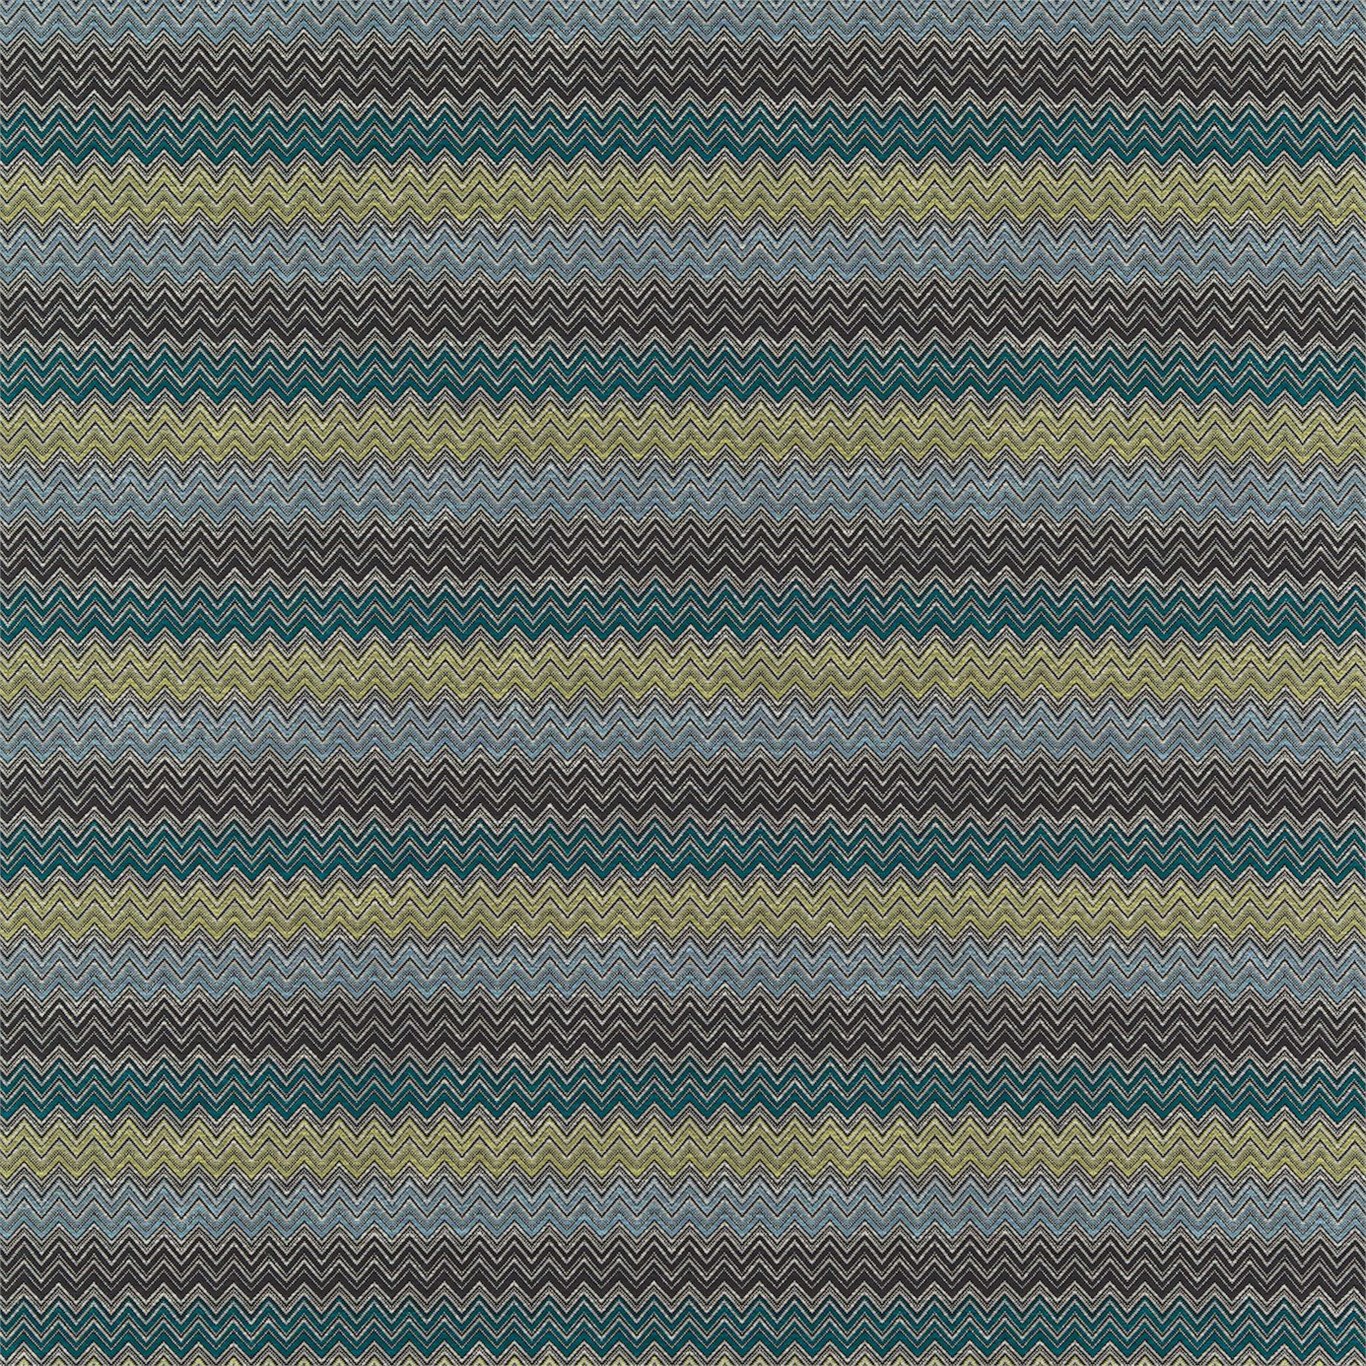 Chevron Teal Citrus Ice Charcoal Fabric by HAR